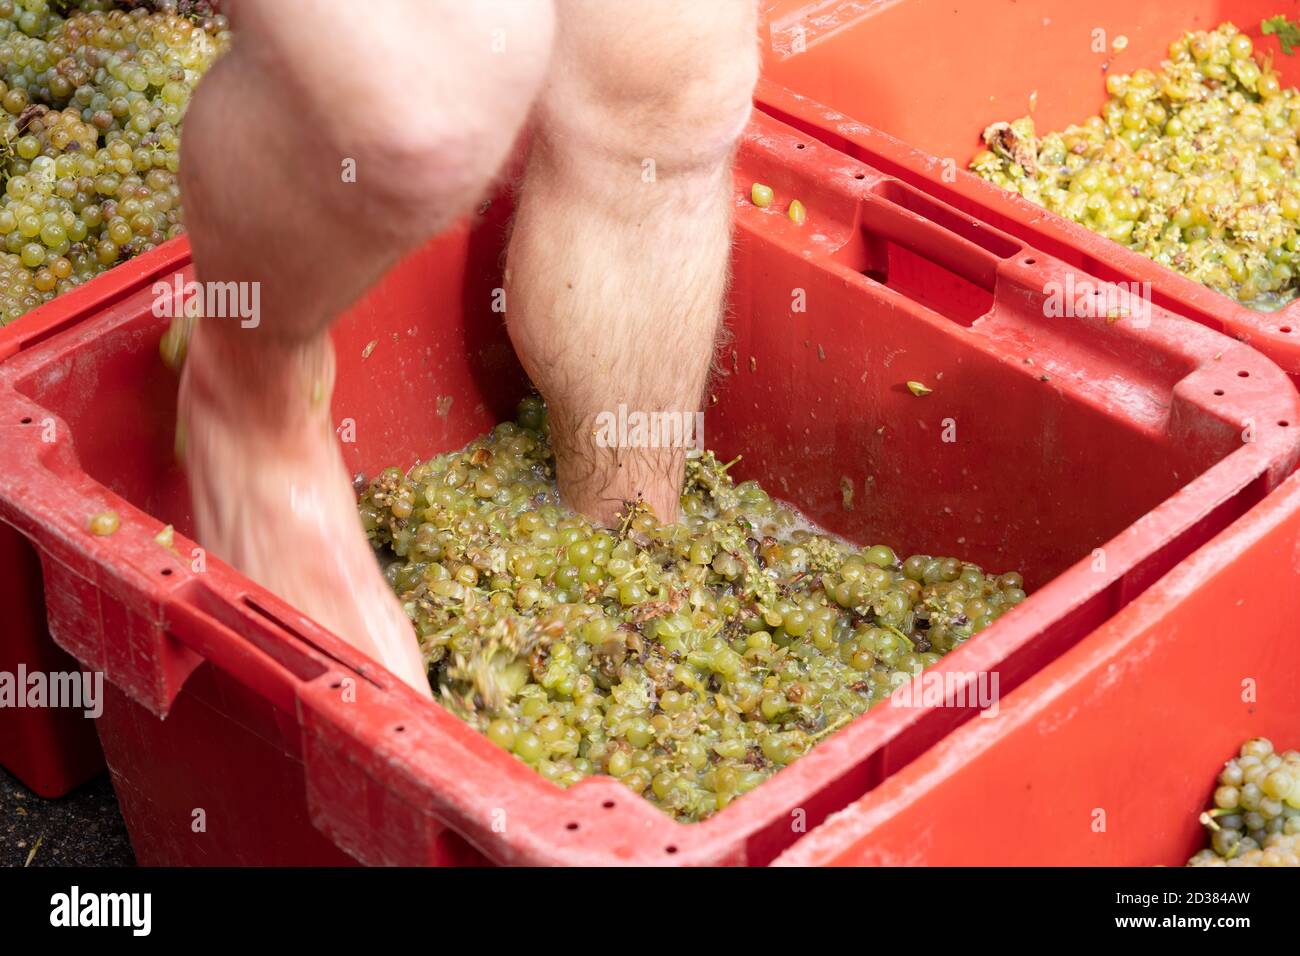 Barefoot man stomps on grapes after the seasonal harvest Stock Photo